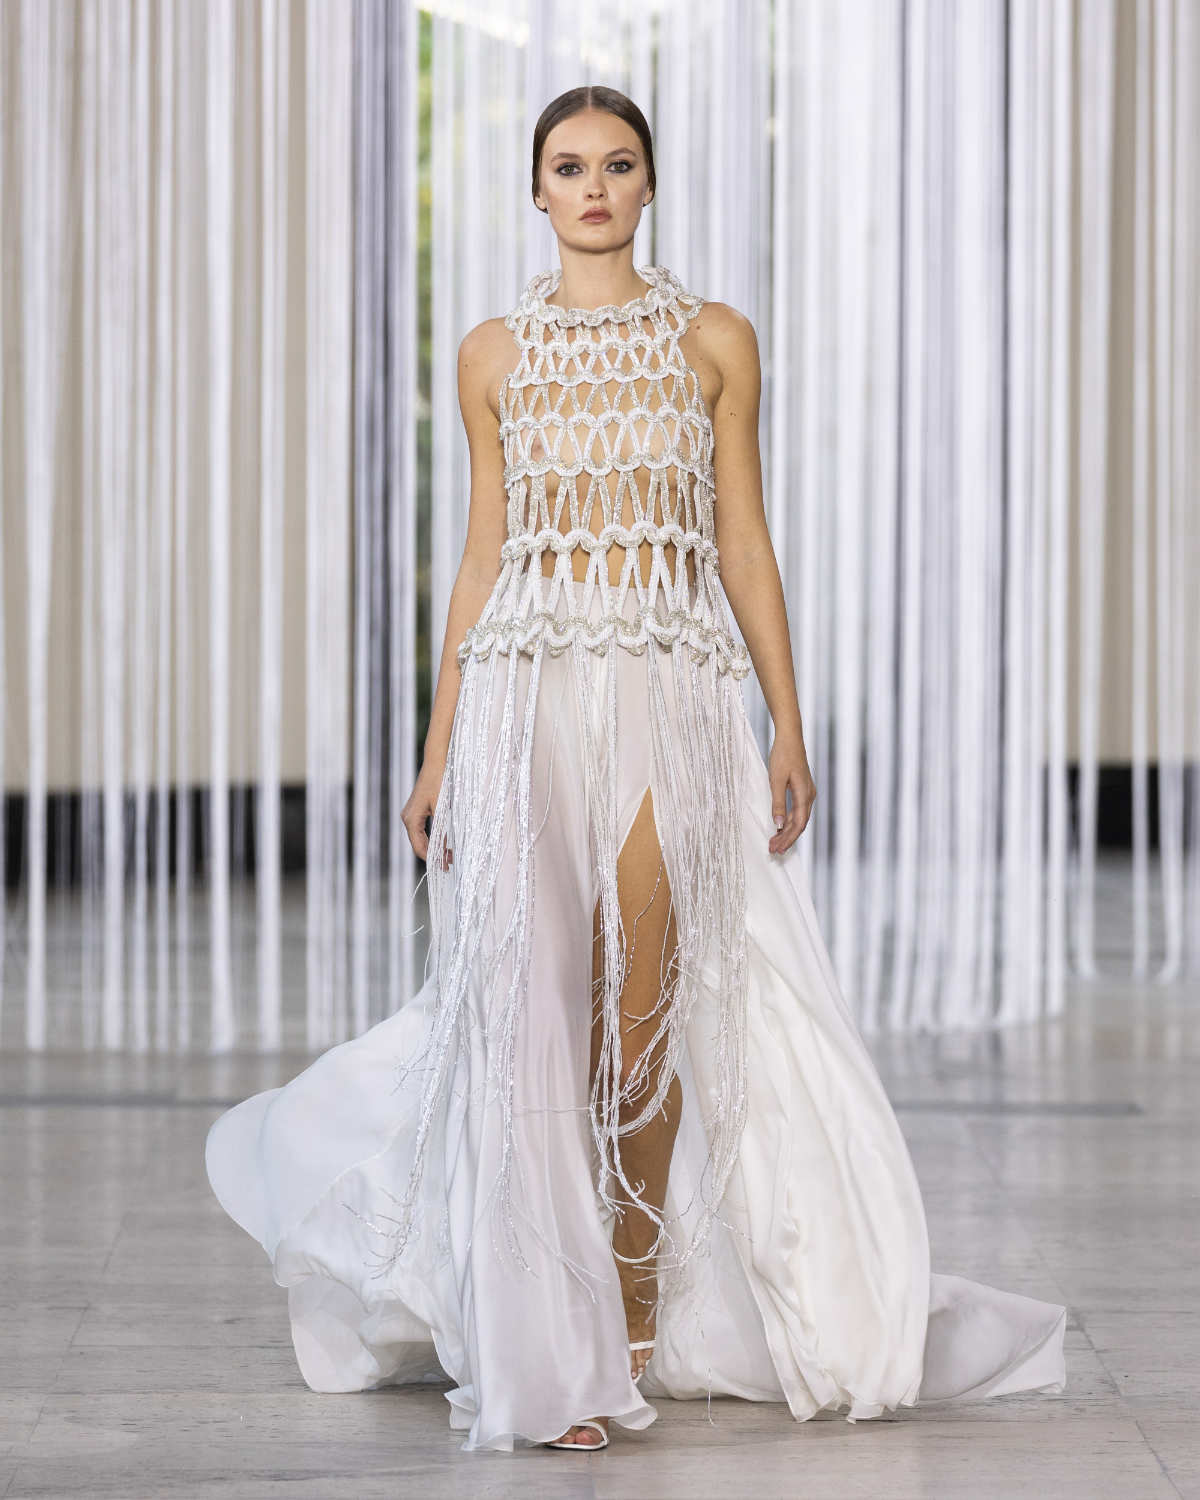 Tony Ward Presents His New Couture Fall Winter 2023/24 Collection